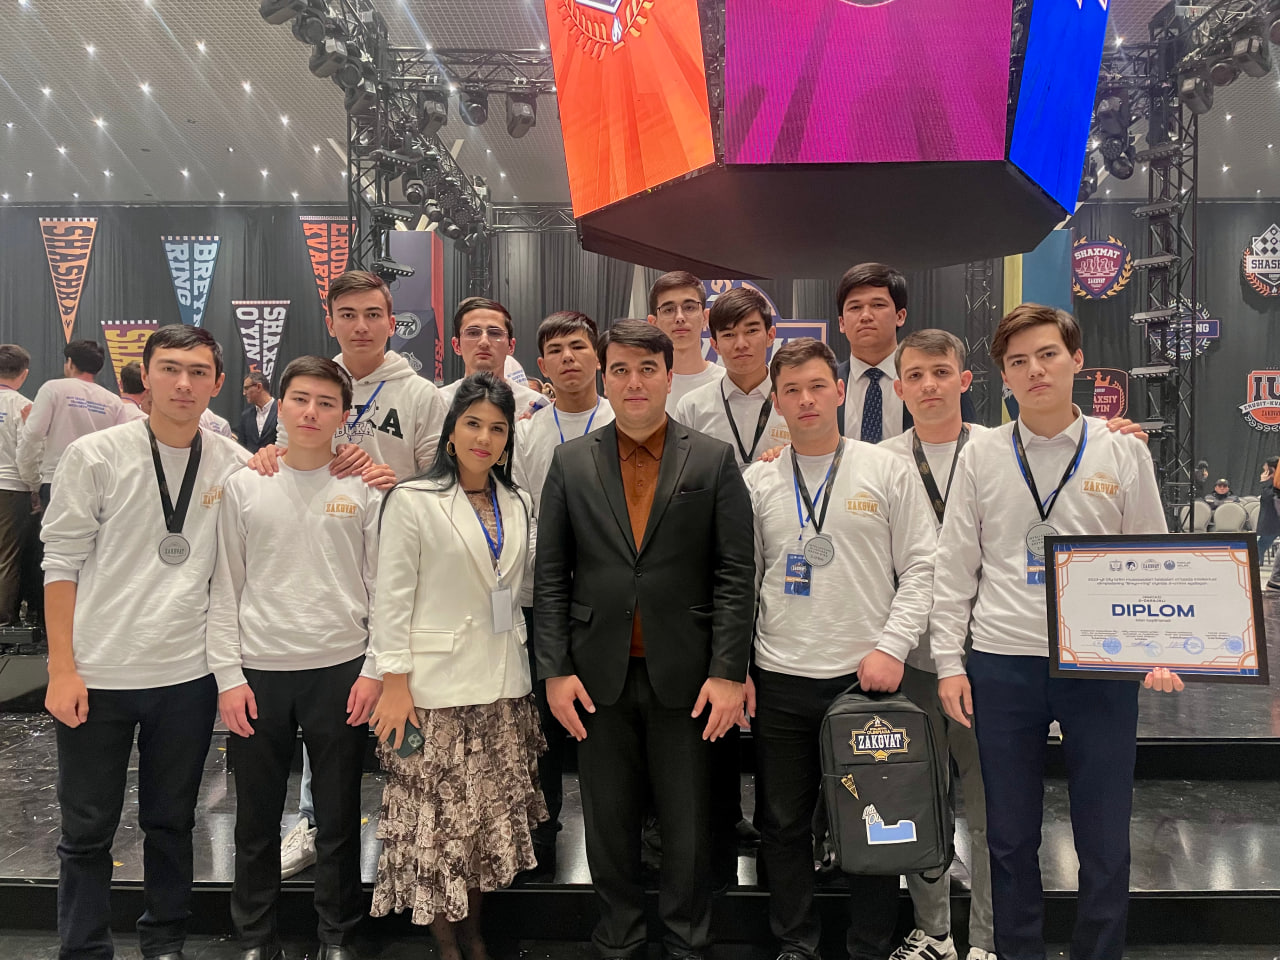 The results of the intellectual Olympiad “Zakovat” were announced